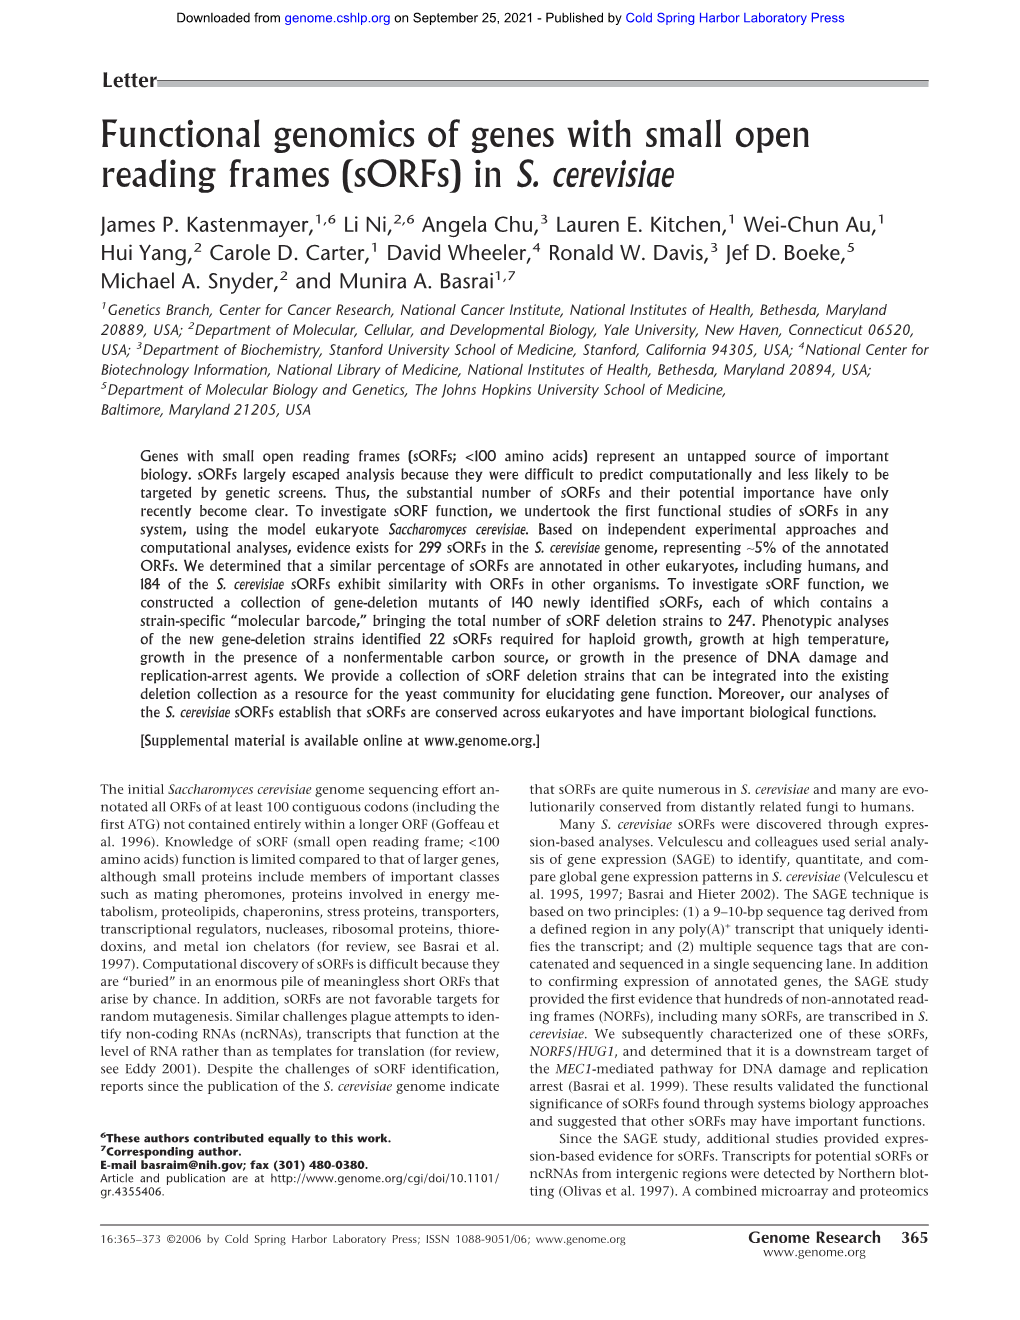 Functional Genomics of Genes with Small Open Reading Frames (Sorfs) in S